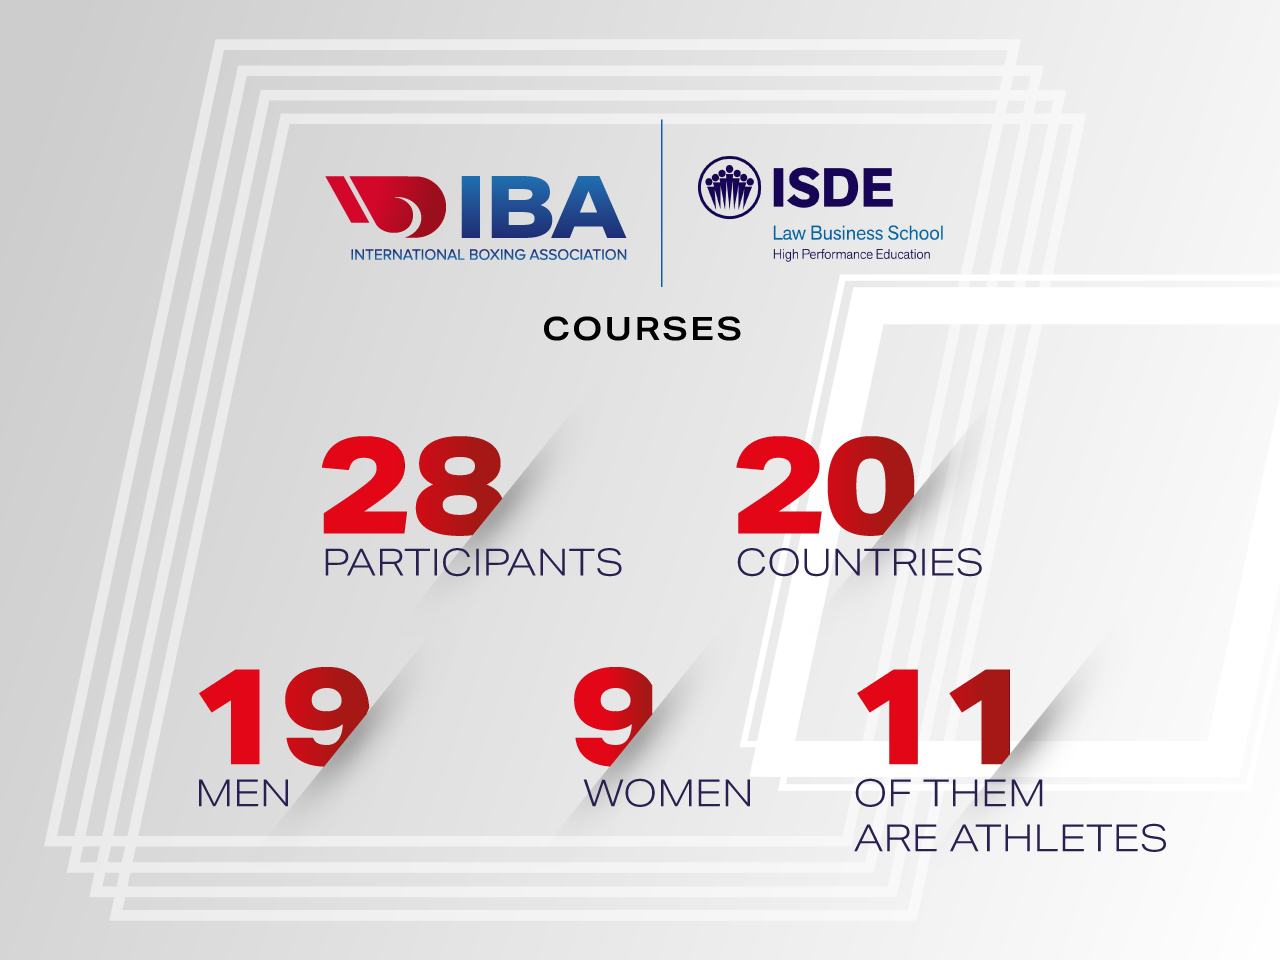 IBA AND ISDE WELCOMES 28 PARTICIPANTS TO INAUGURAL JOINT SPORTS MANAGEMENT COURSE